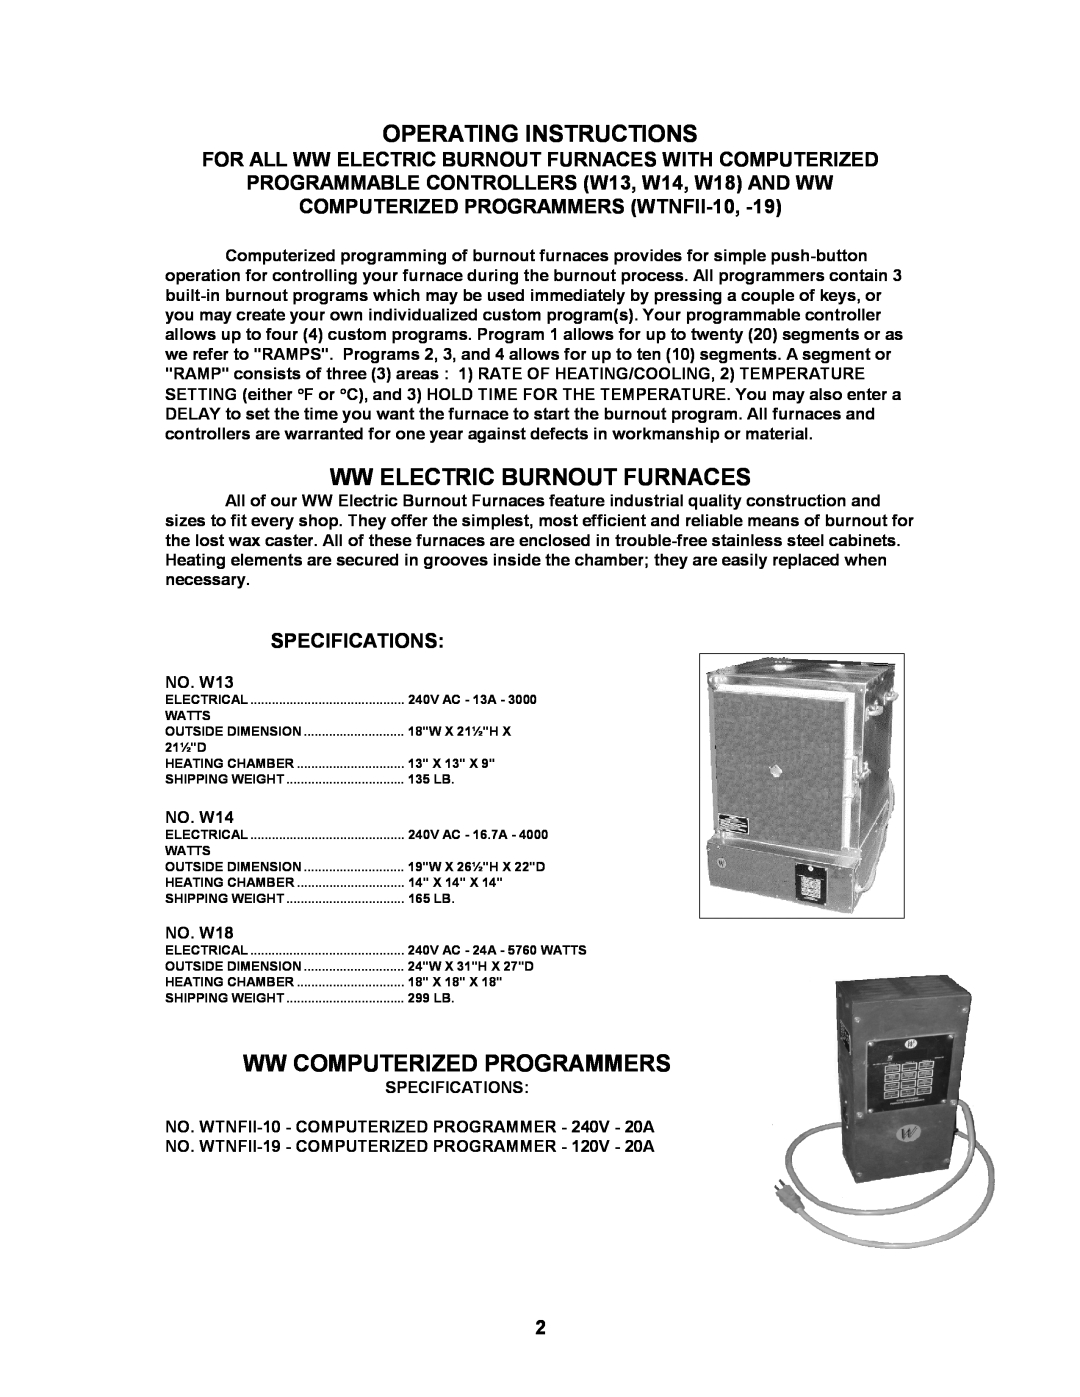 Paragon W18, WTNFII-19 Operating Instructions, Ww Electric Burnout Furnaces, Ww Computerized Programmers, Specifications 